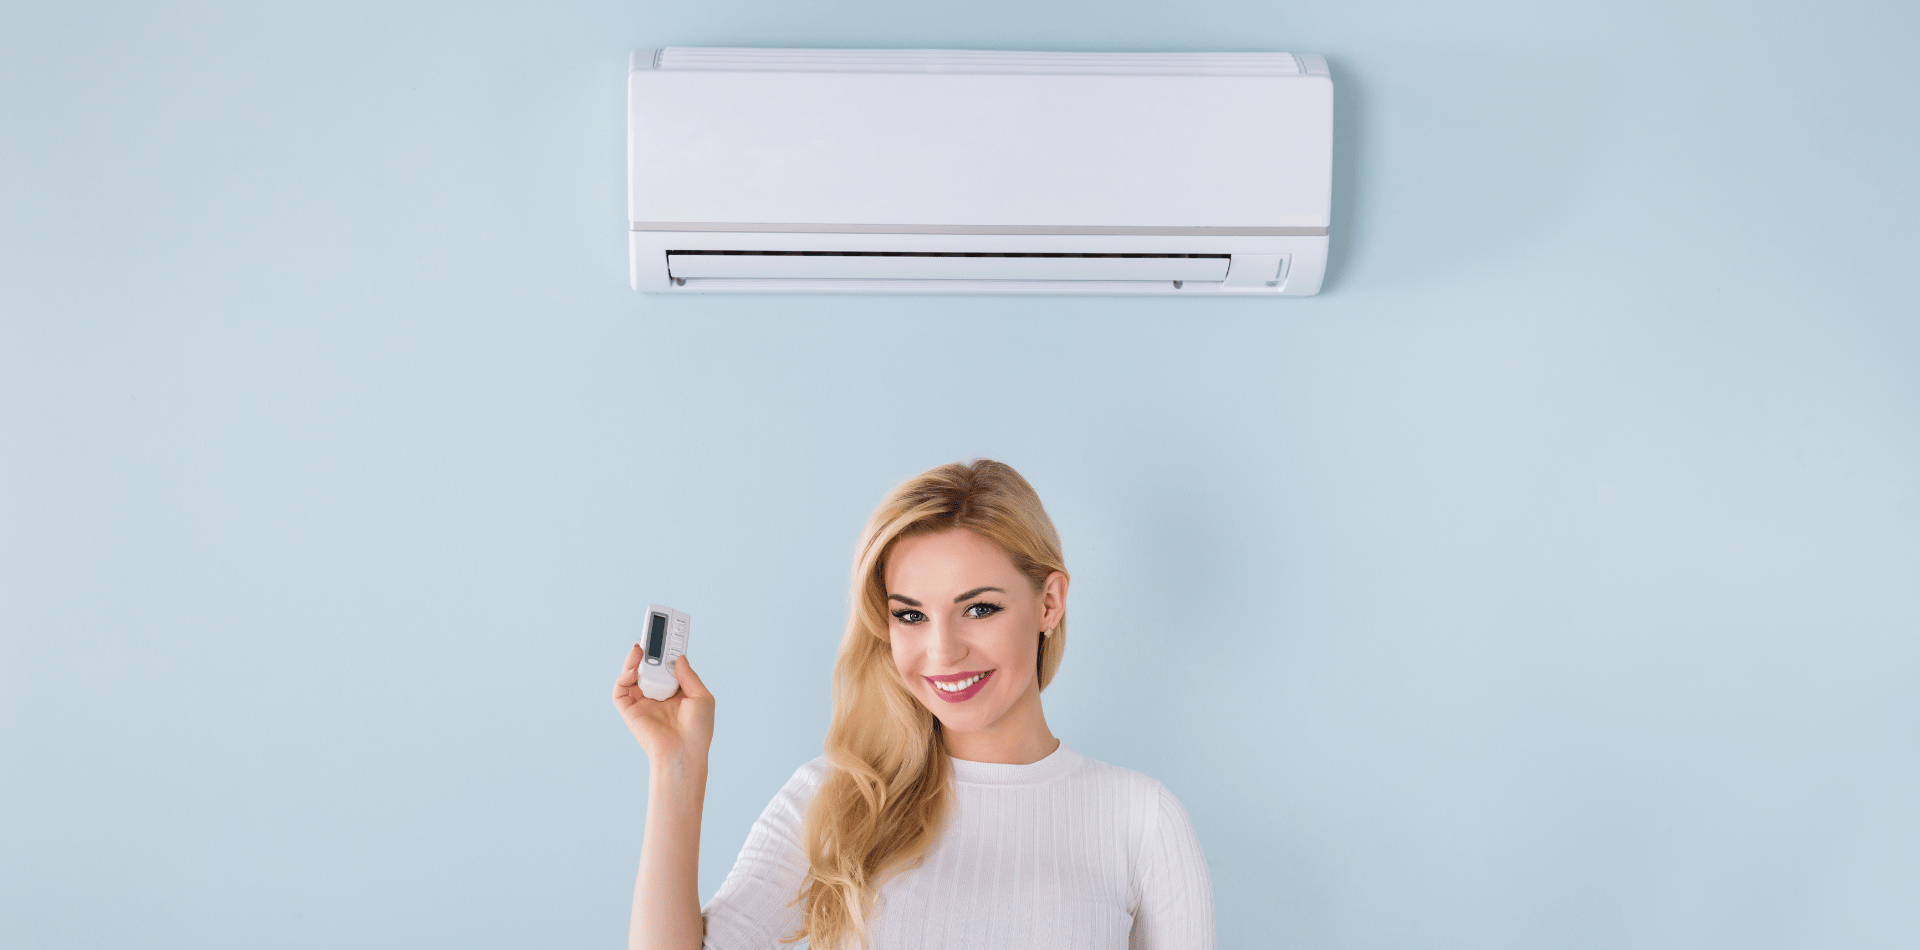 A girl using a split system air conditioner